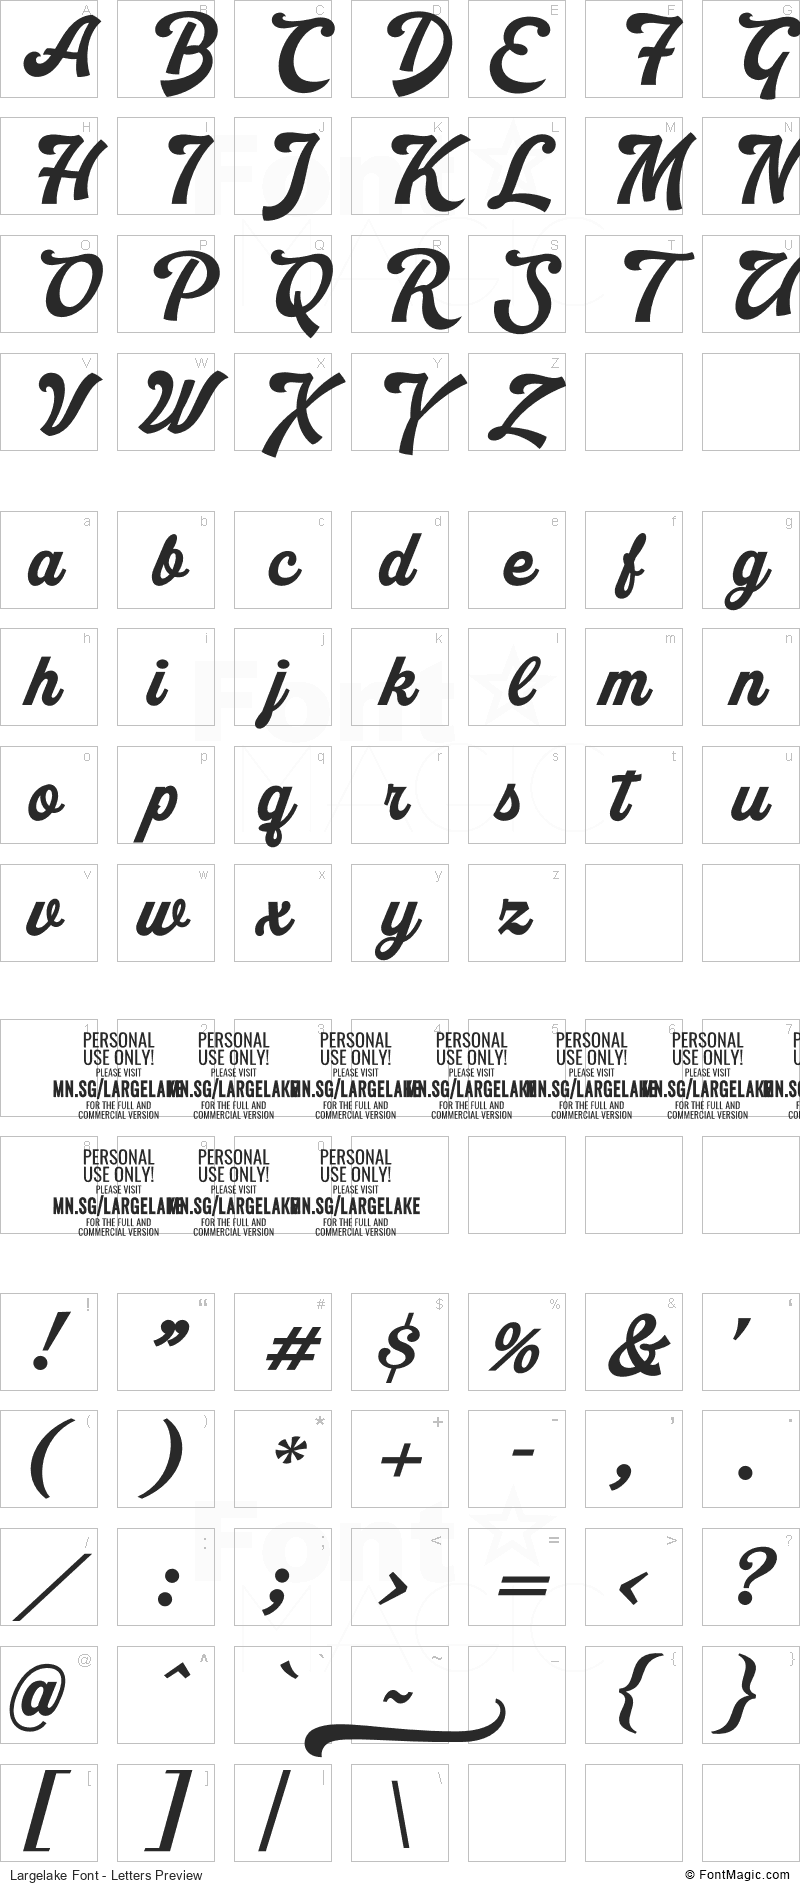 Largelake Font - All Latters Preview Chart